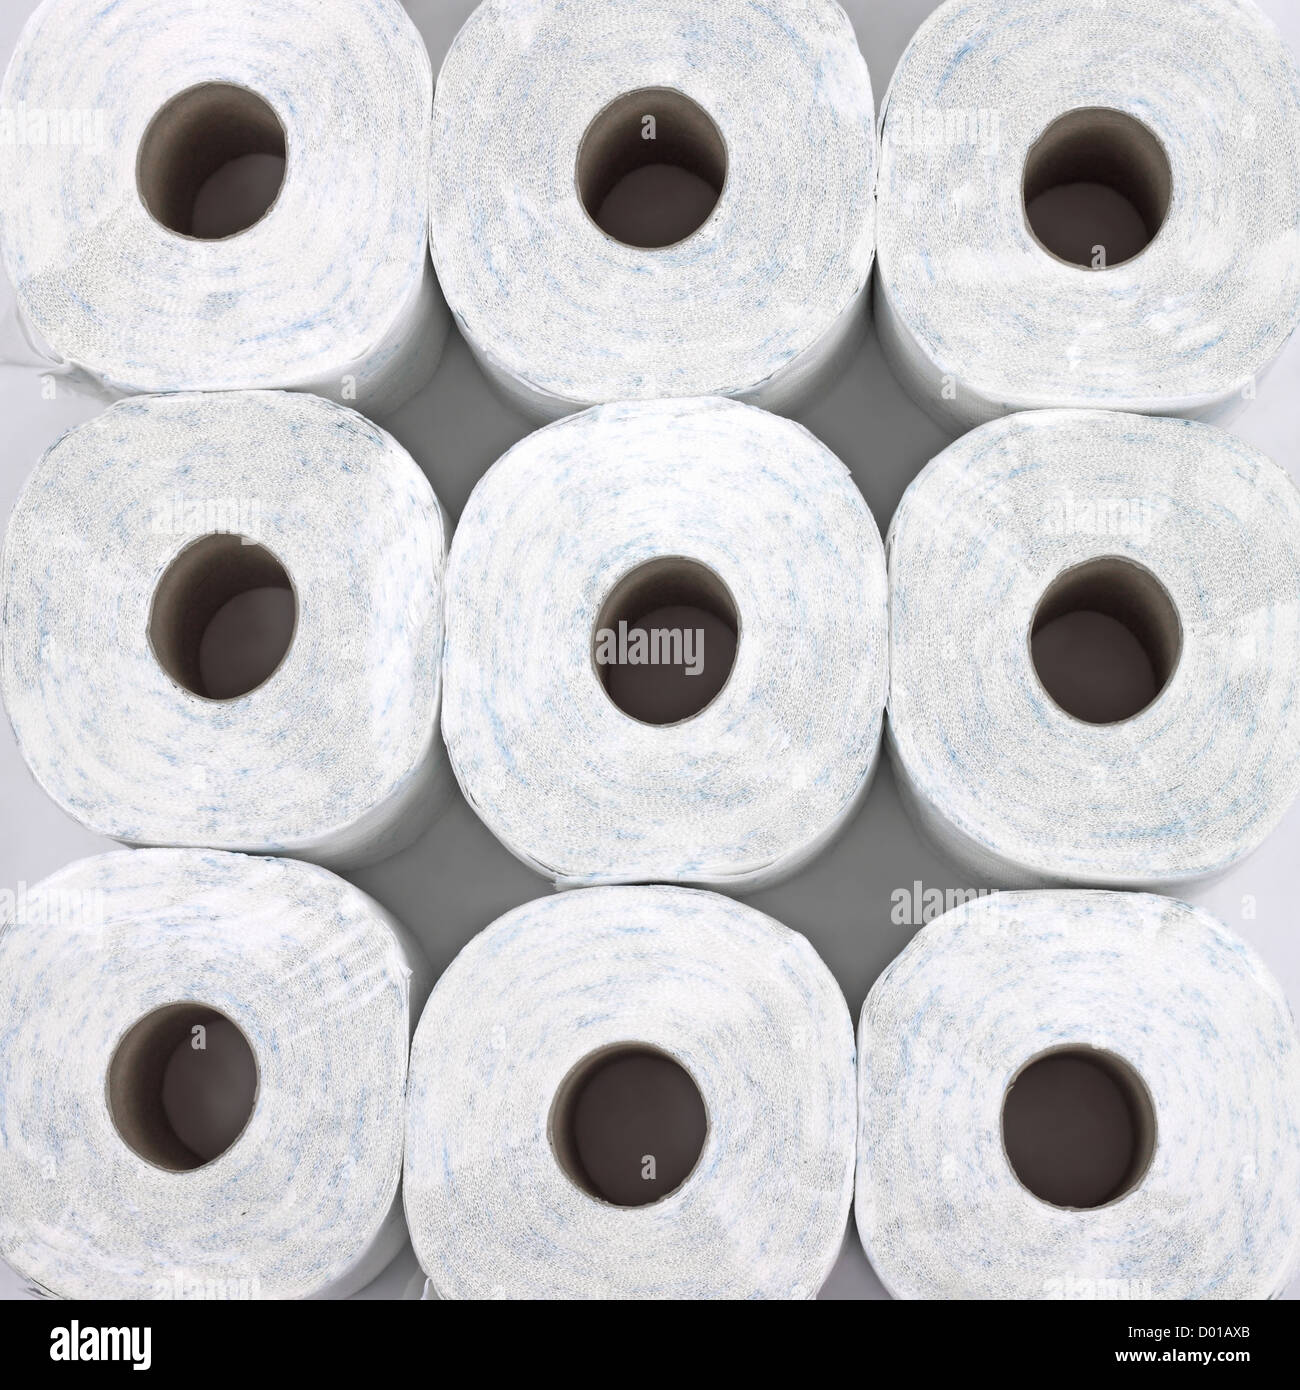 Rolls of toilet paper on a light background Stock Photo